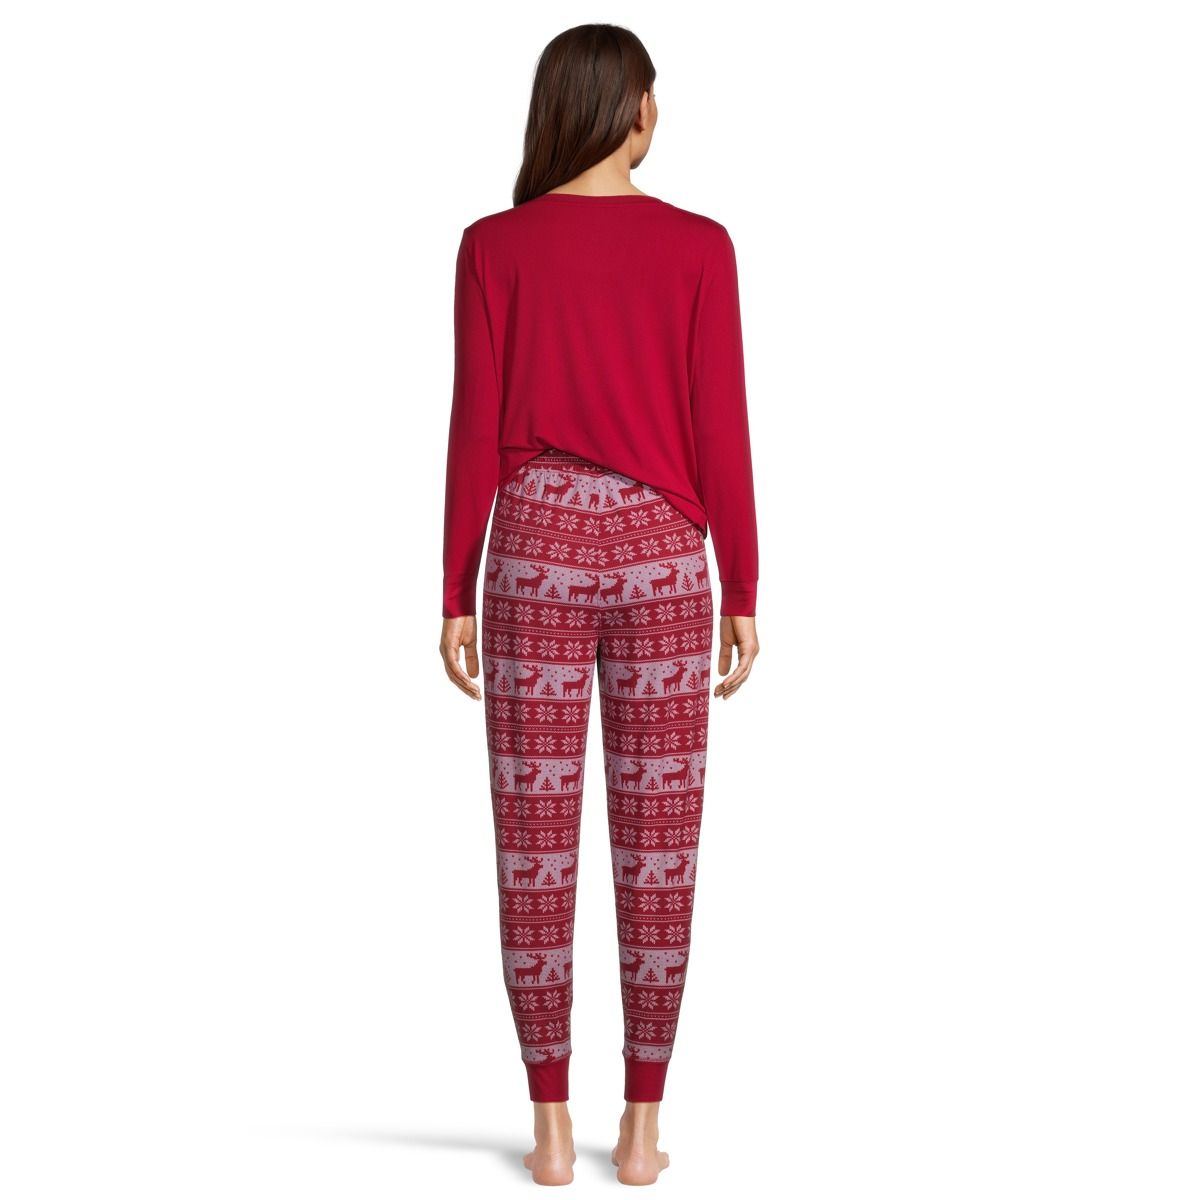 https://media-www.sportchek.ca/product/div-03-softgoods/dpt-79-clothing-accessories/sdpt-02-womens/334112366/ripzone-sleepwear-set-holiday-rio-red-923-w-74cd51de-b485-49d9-a4b3-026c296cca73-jpgrendition.jpg?imdensity=1&imwidth=1244&impolicy=mZoom